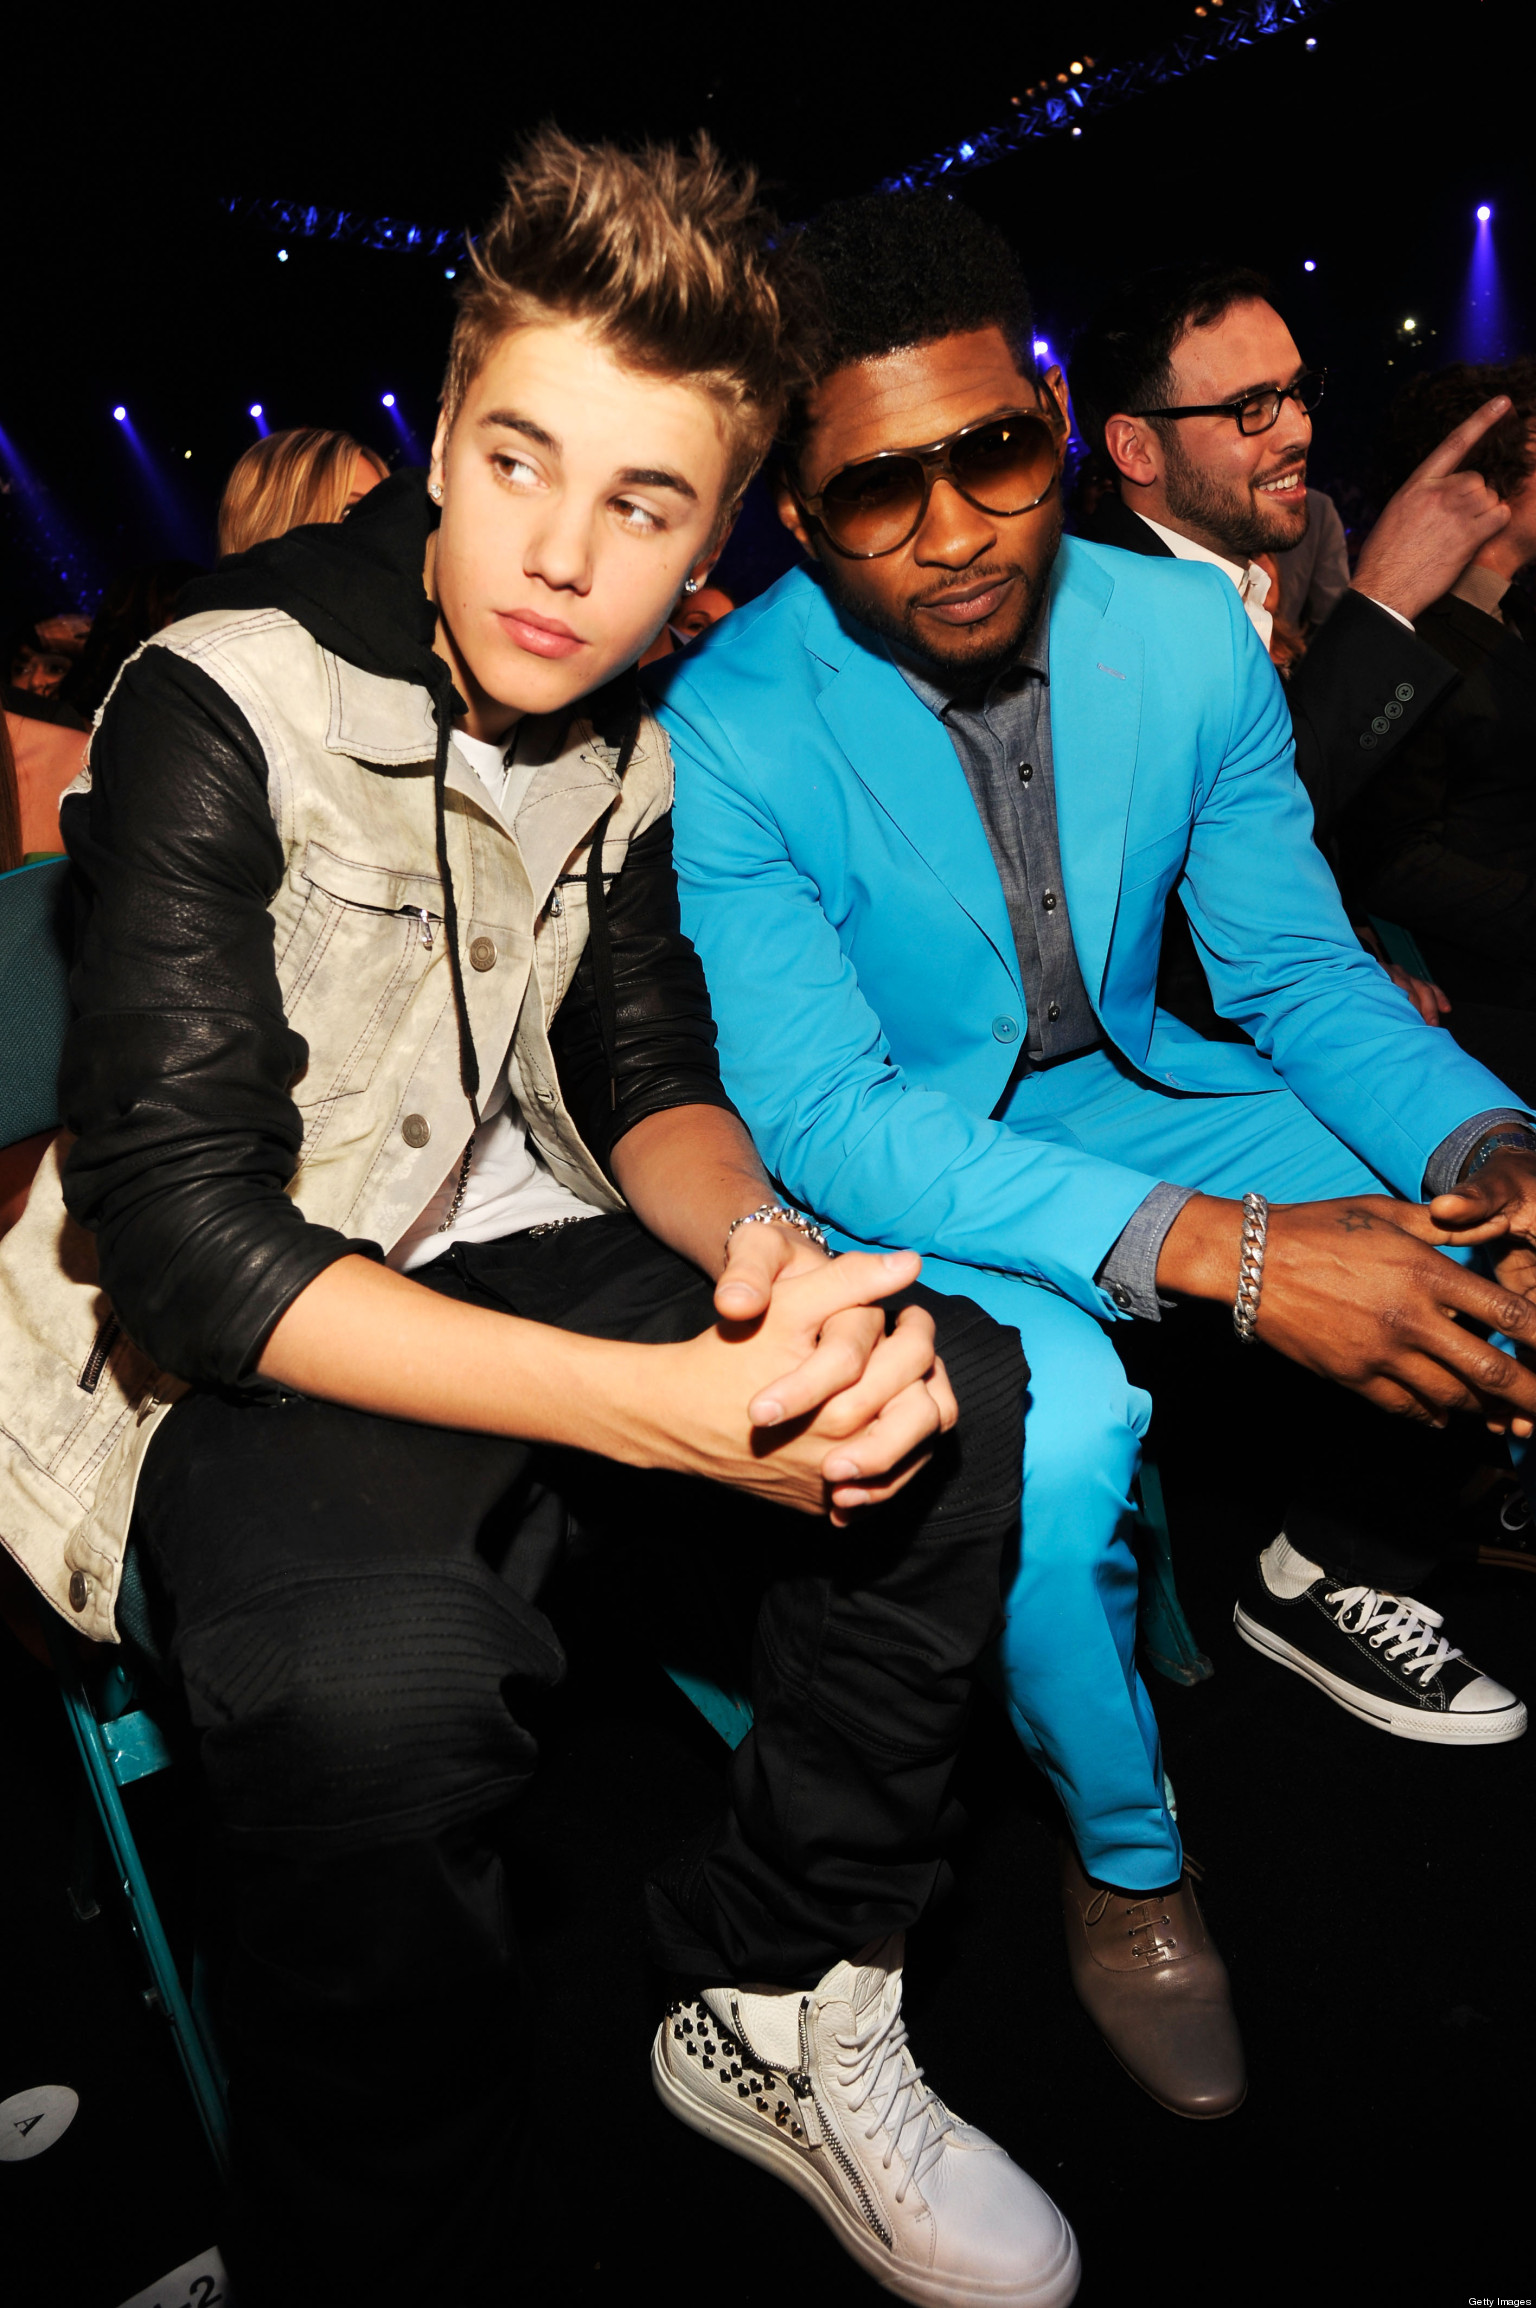 Usher On Justin Bieber: He's Young, 'We Hope... He'll Continue To Mature' | HuffPost